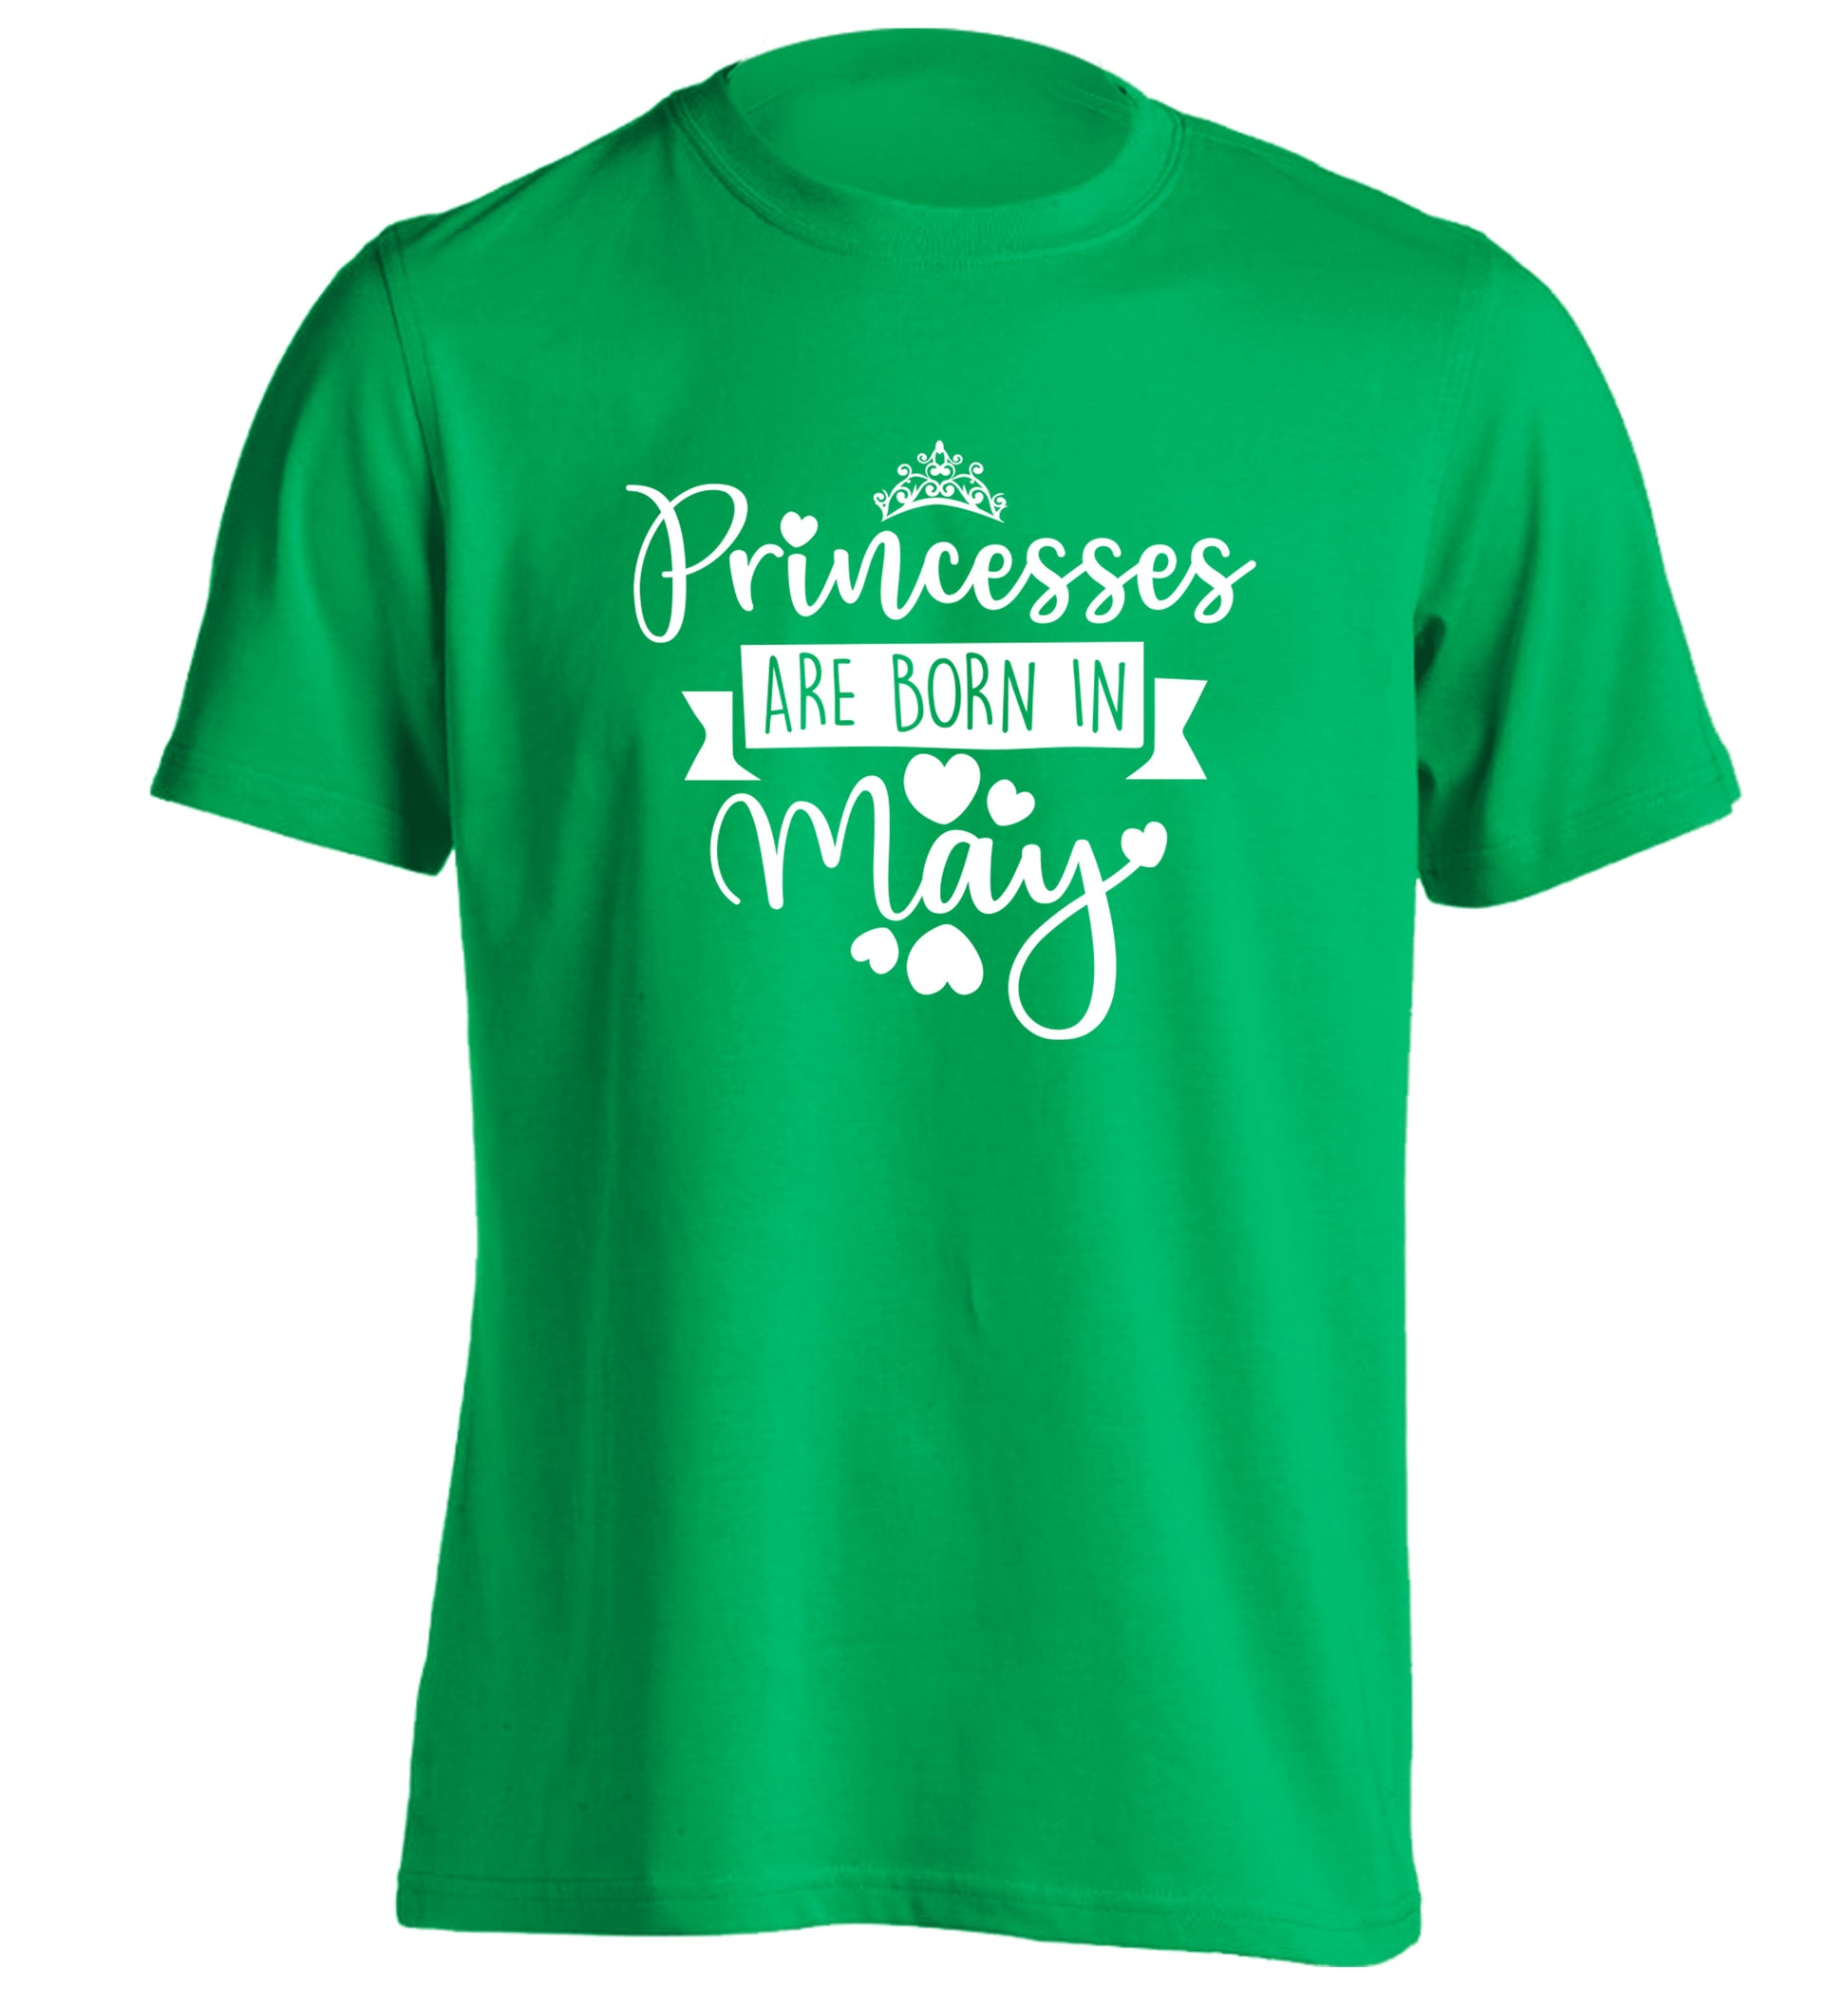 Princesses are born in May adults unisex green Tshirt 2XL